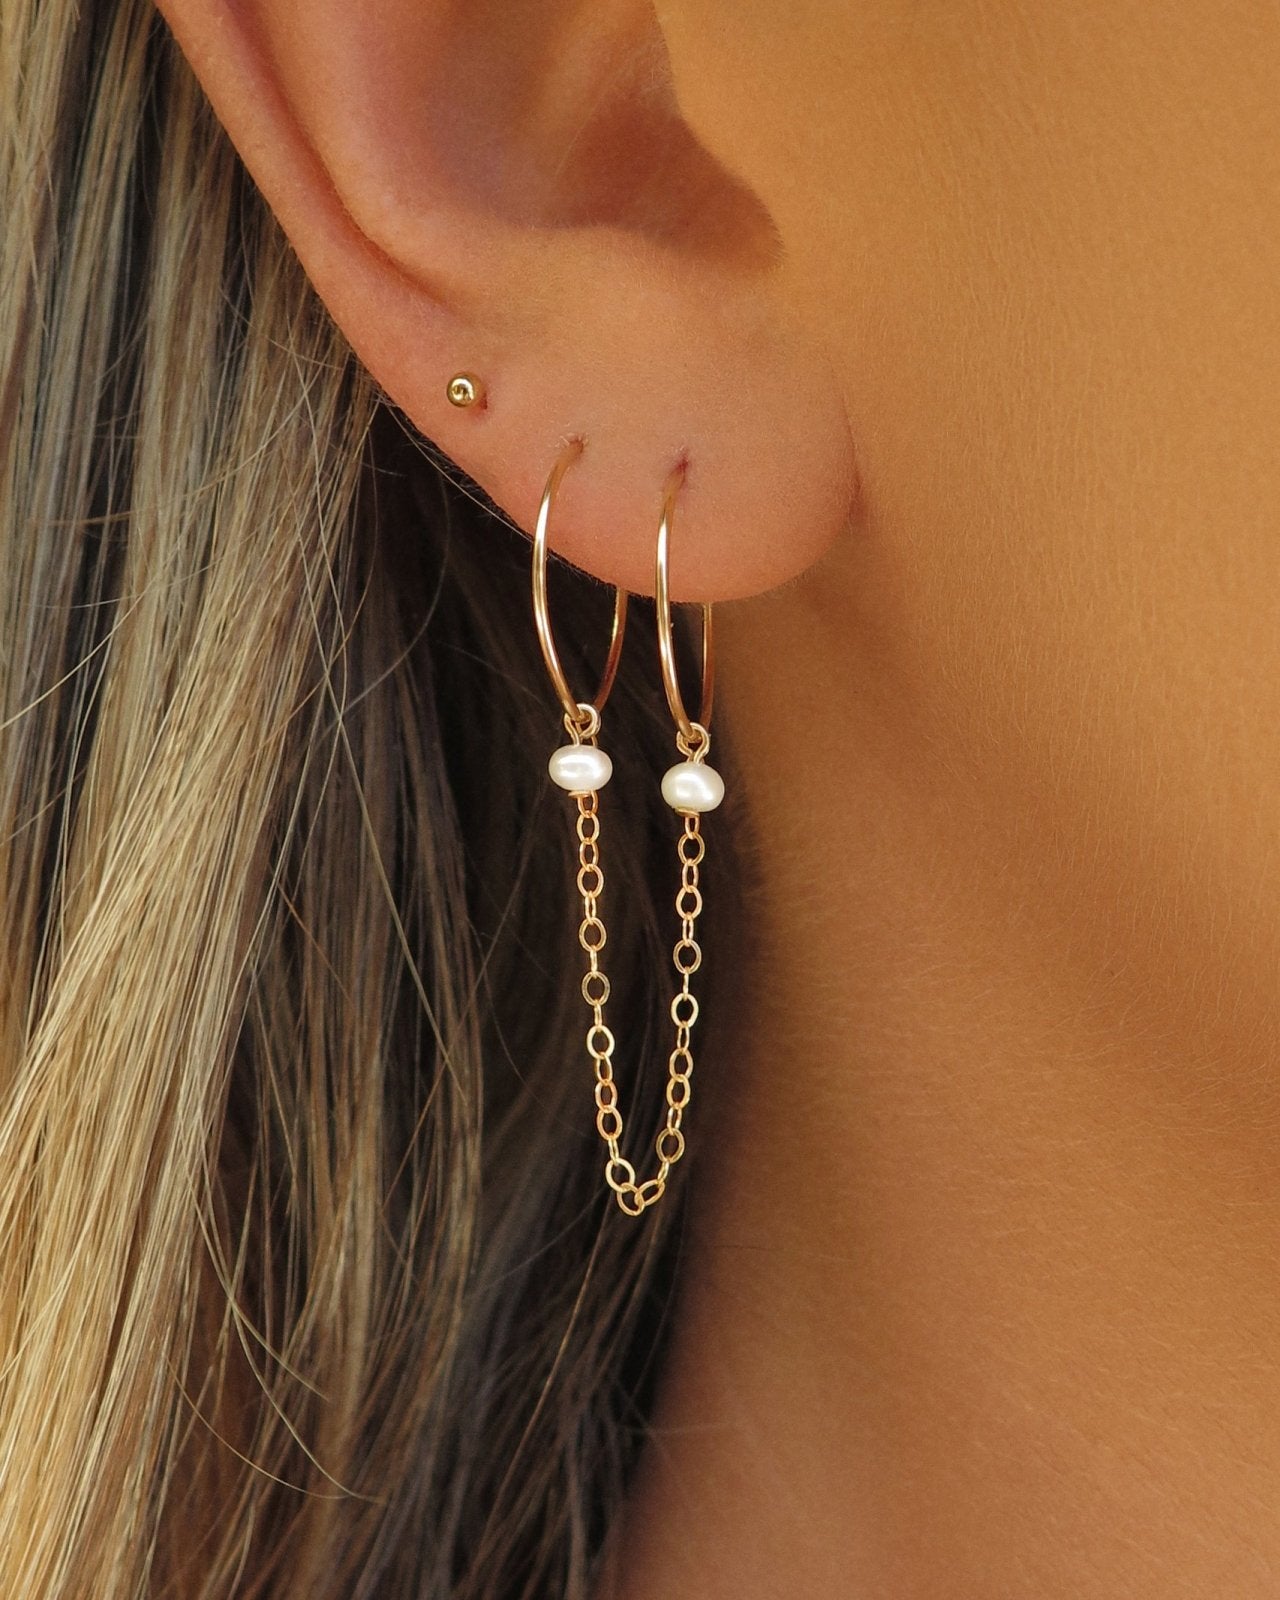 Share 169+ connected earrings for double piercings best